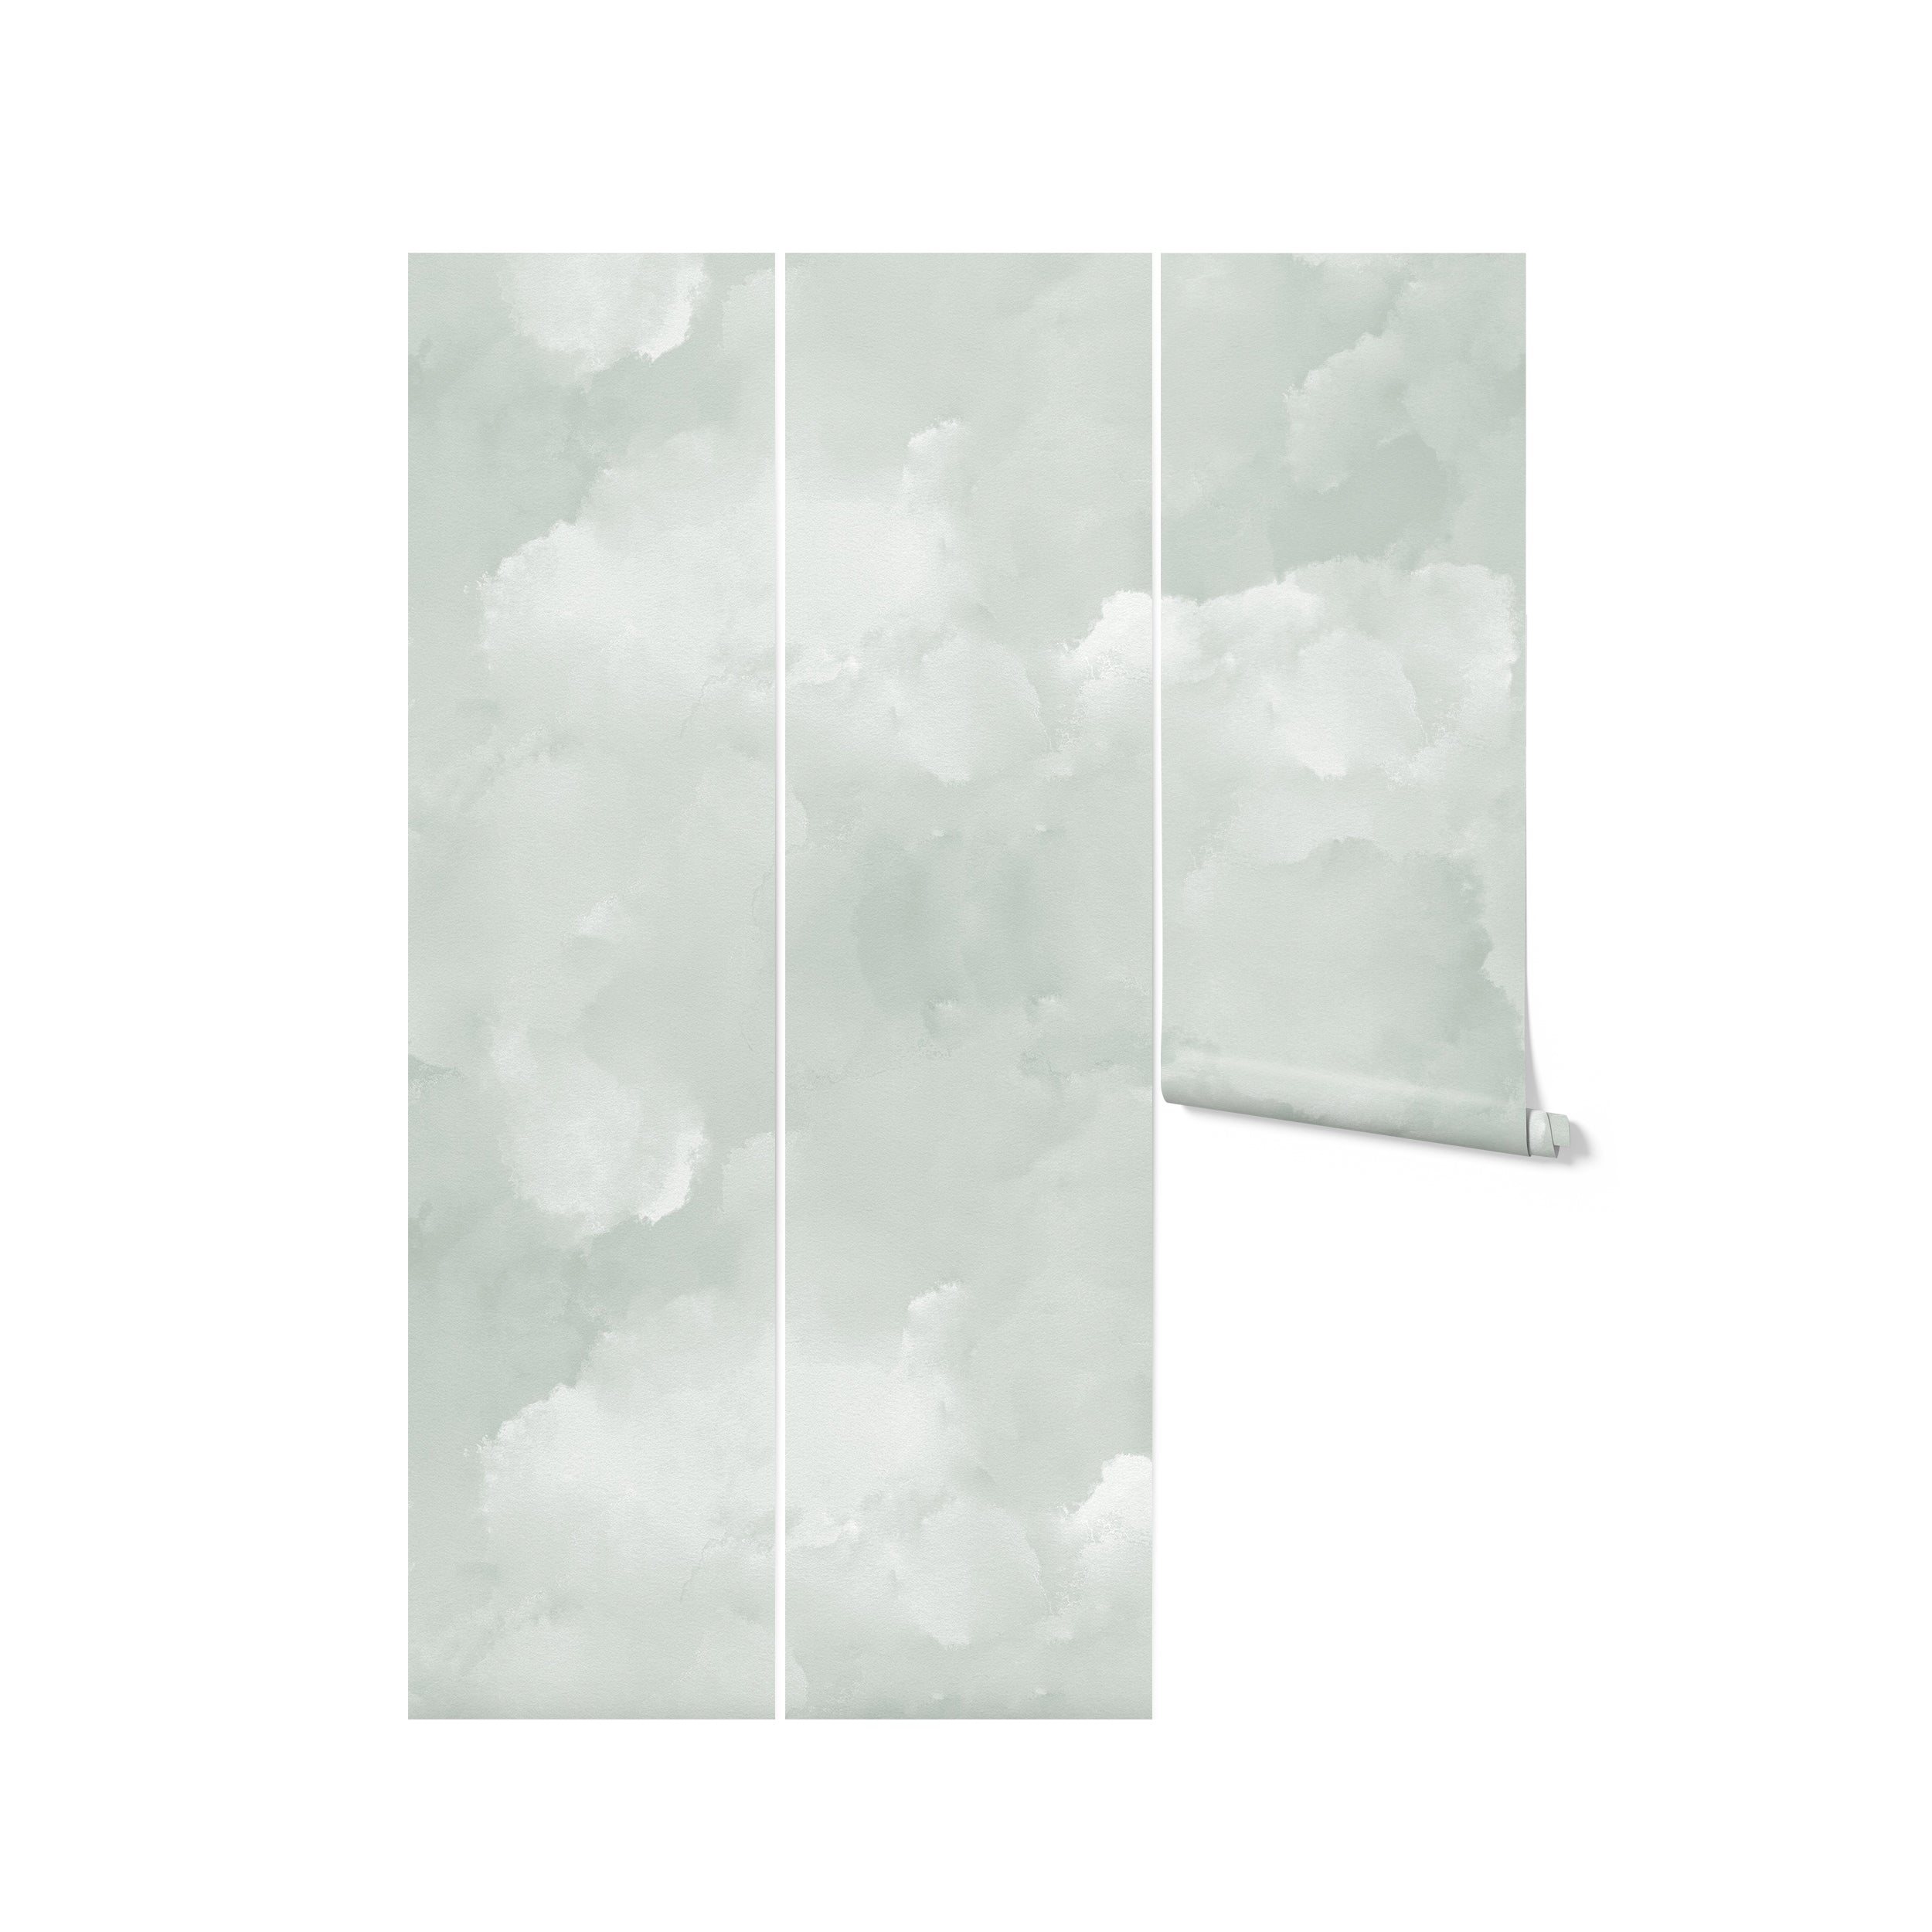 Three vertical strips of light sage cloud mural wallpaper unrolled and displayed, showcasing the soft, cloudy patterns in shades of sage green and white.